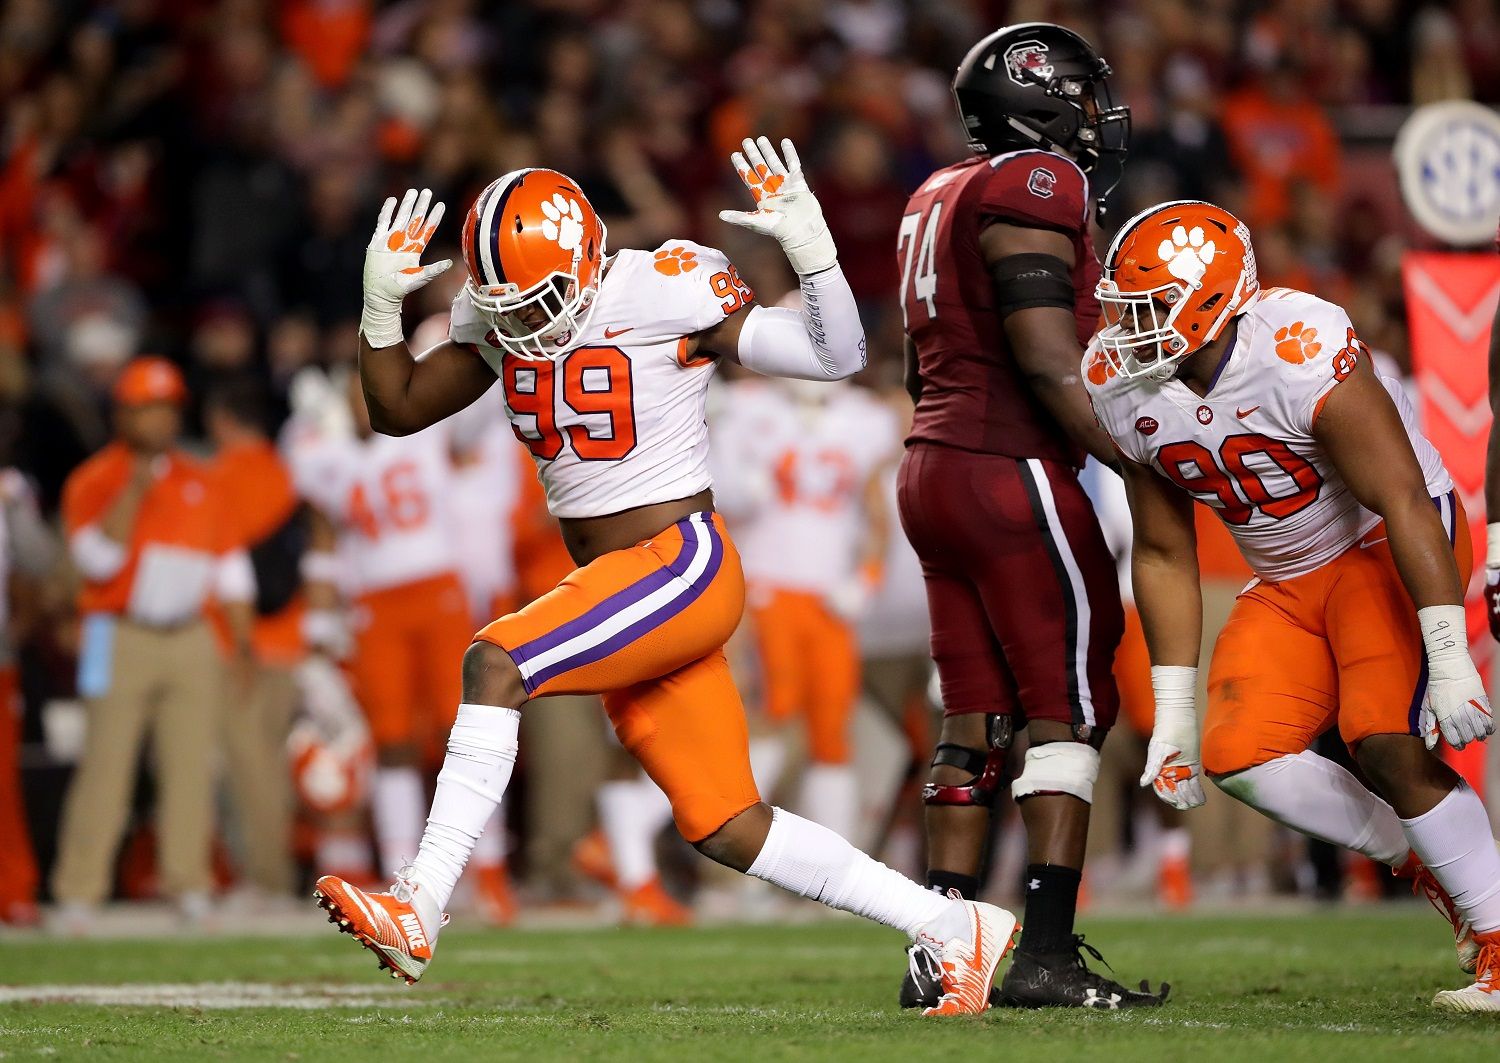 COLUMBIA, SC - NOVEMBER 25:  Clelin Ferrell #99 of the Clemson Tigers reacts after a play against the South Carolina Gamecocks during their game at Williams-Brice Stadium on November 25, 2017 in Columbia, South Carolina.  (Photo by Streeter Lecka/Getty Images)